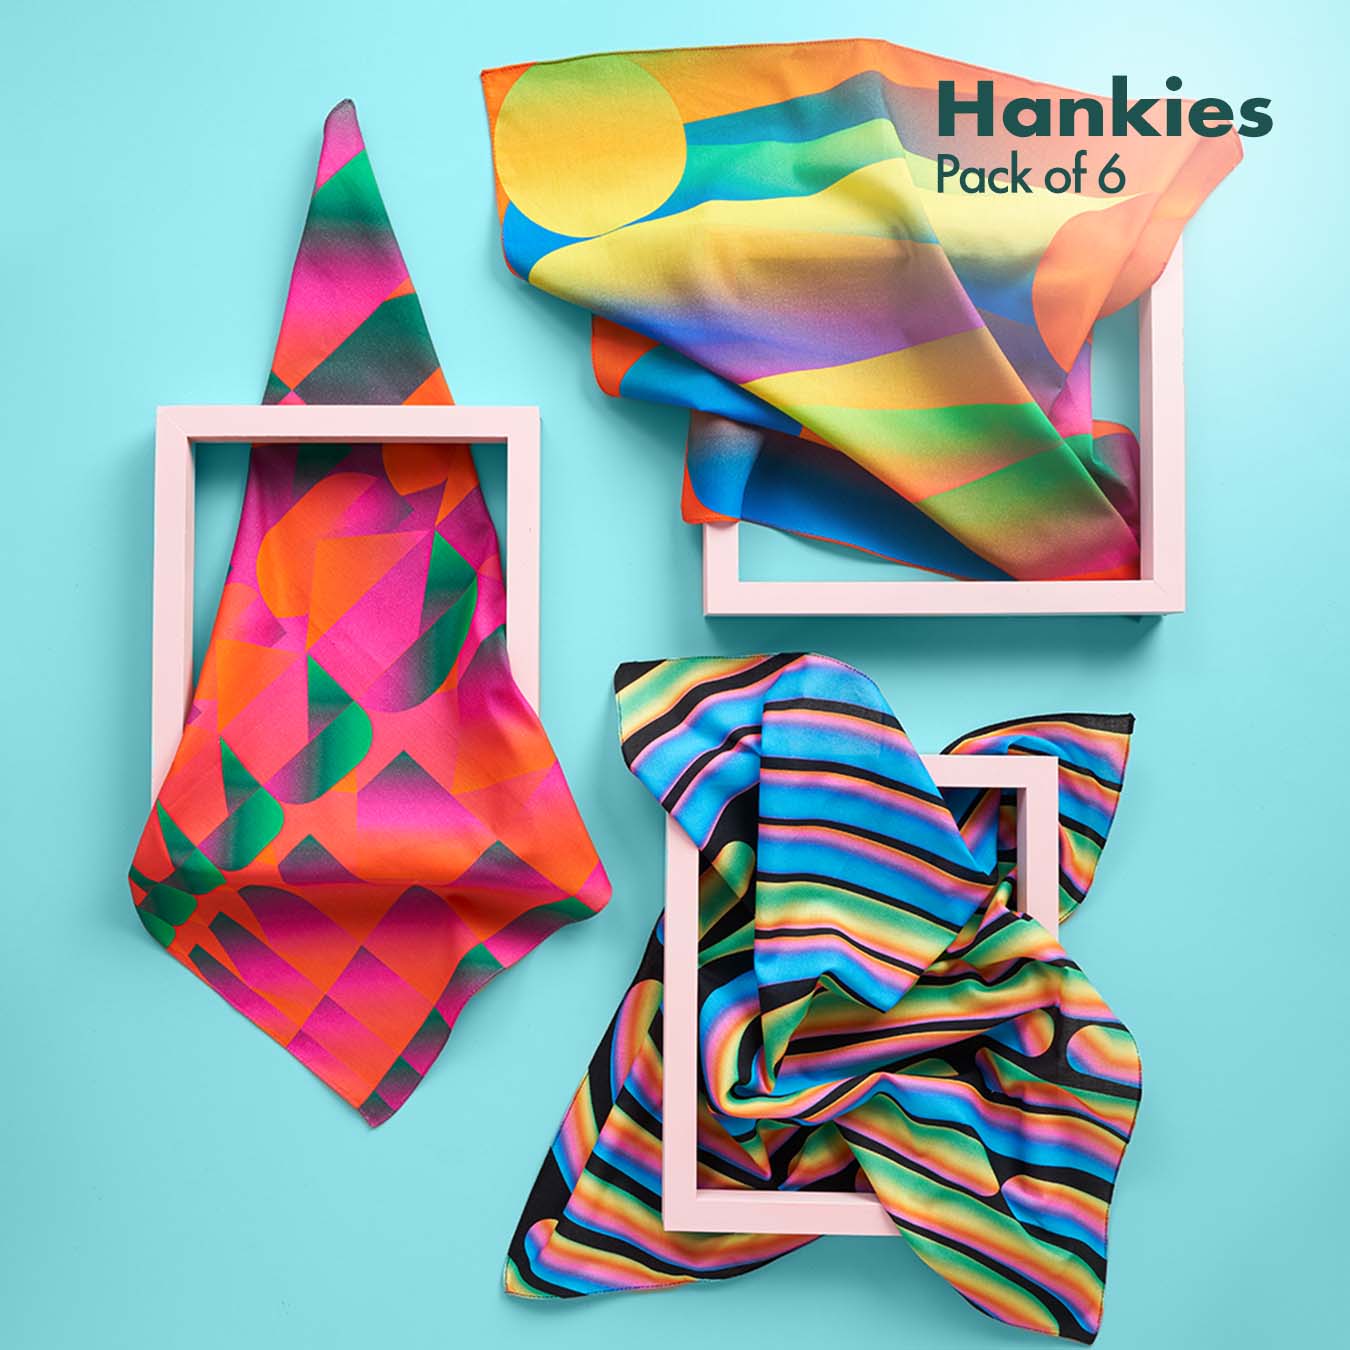 ASAP! As Abstract As Possible! Women's Hankies, 100% Organic Cotton, Pack of 6